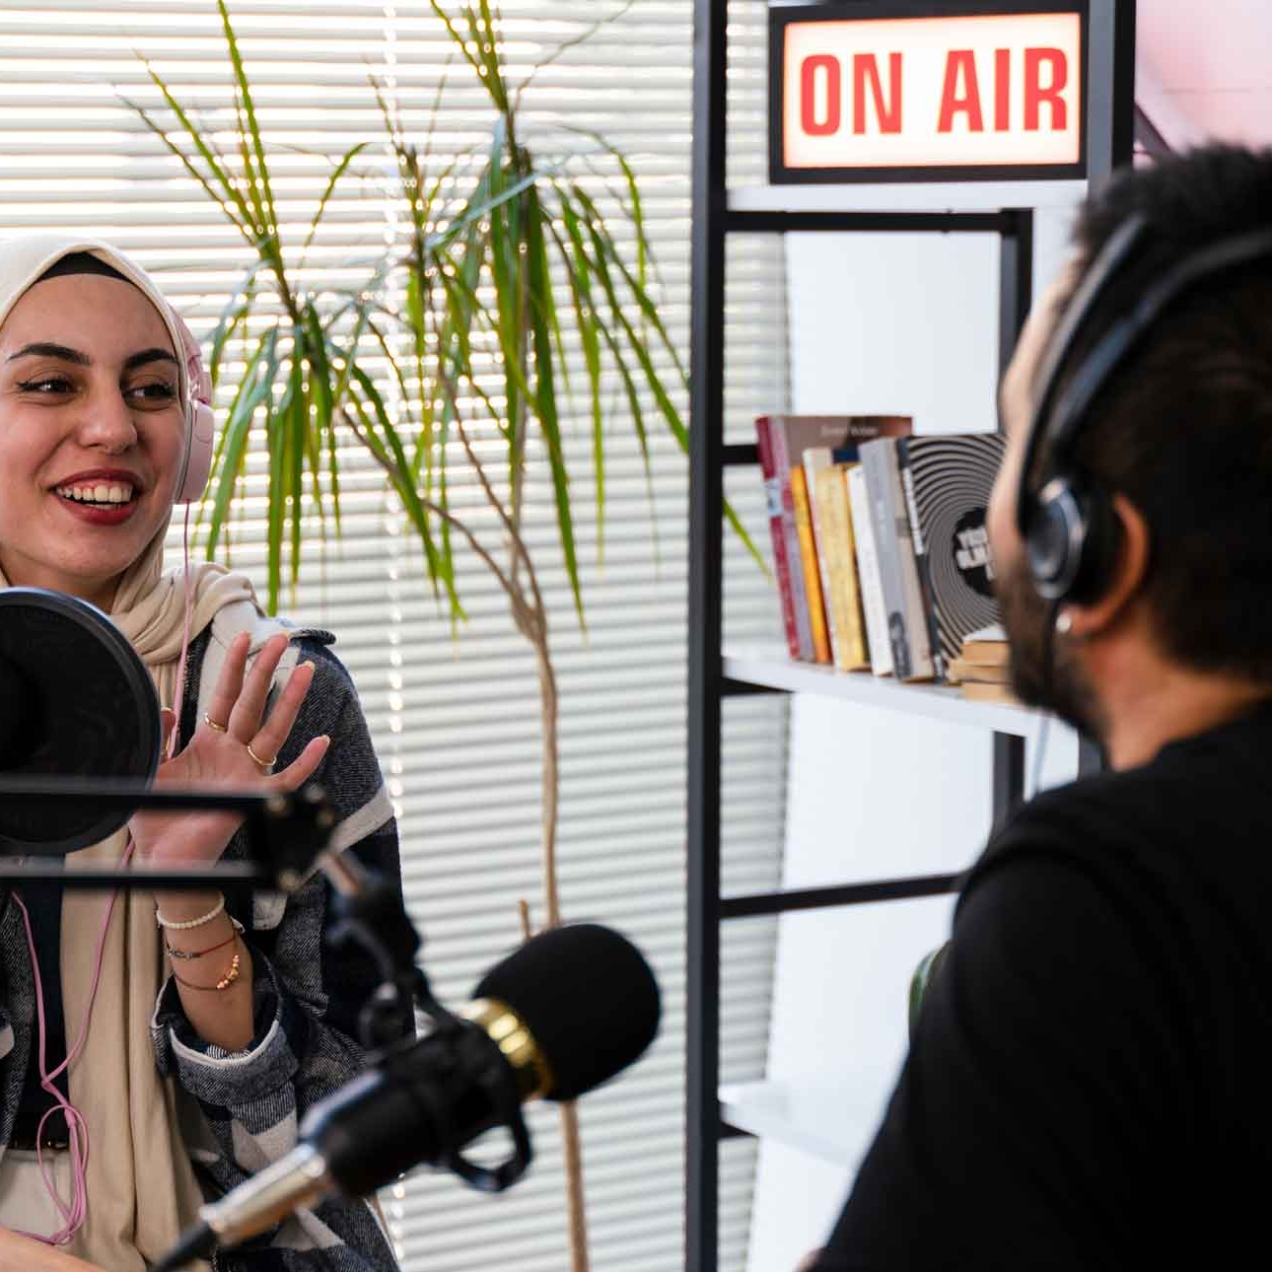 A smiling woman wearing large headphones over her cream hijab engages in conversation during a podcast. She faces an unidentified man with dark hair and black shirt. They are surrounded by microphones, laptop, notepad and an on-air sign upon a shelf.